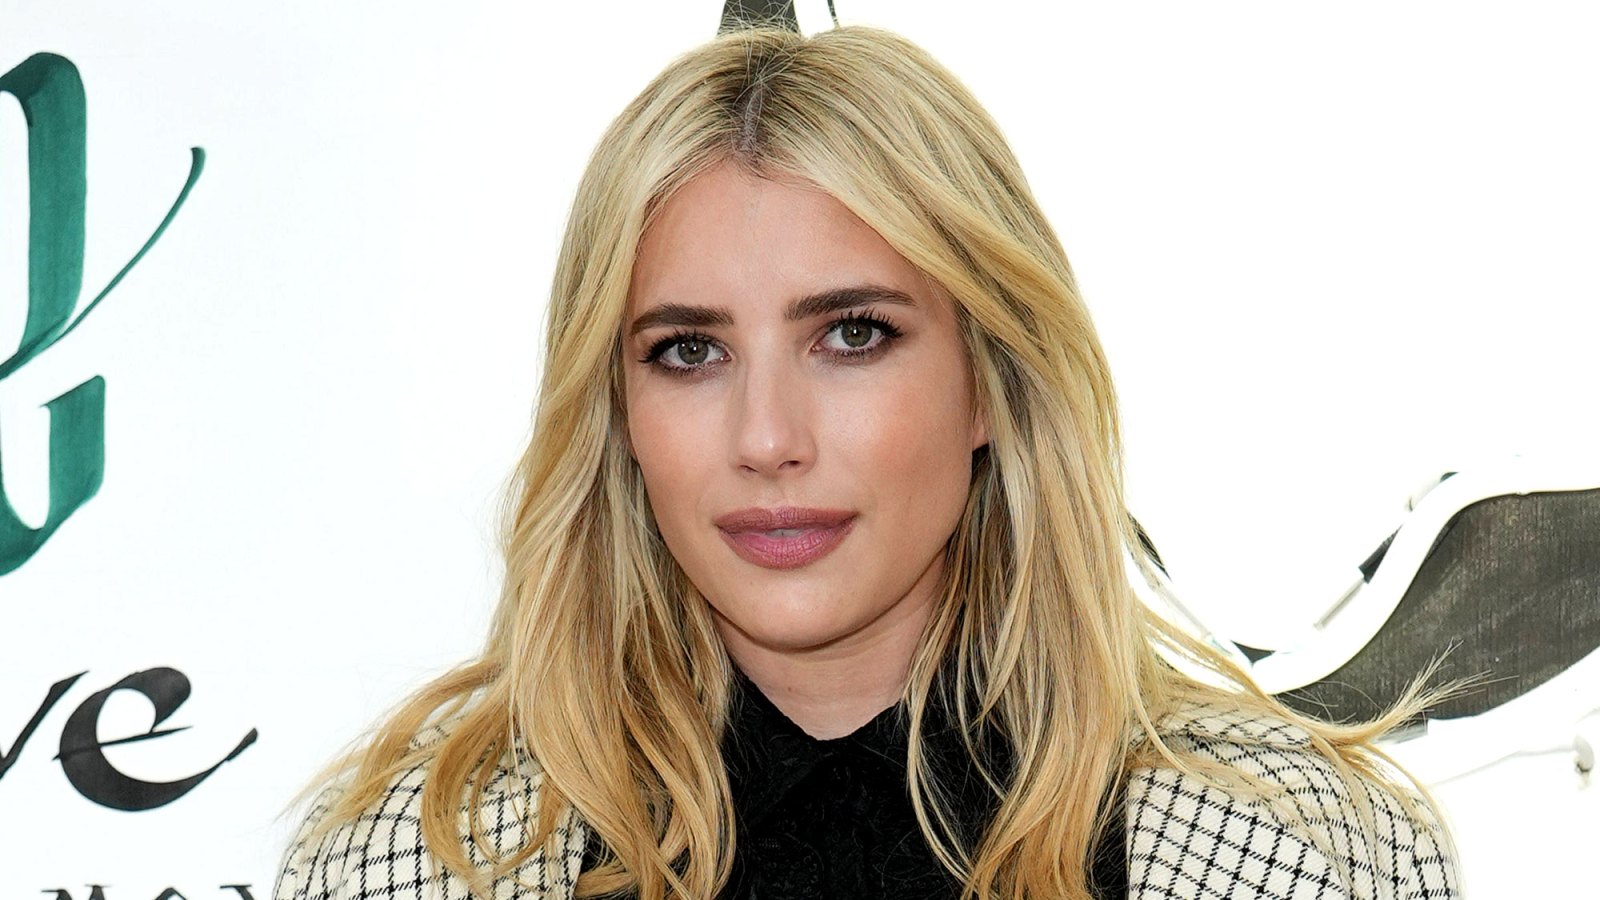 Emma Roberts Accidentally 'Popped' Sequin Skirt While Climbing Into Car Before Dolce & Gabbana Show